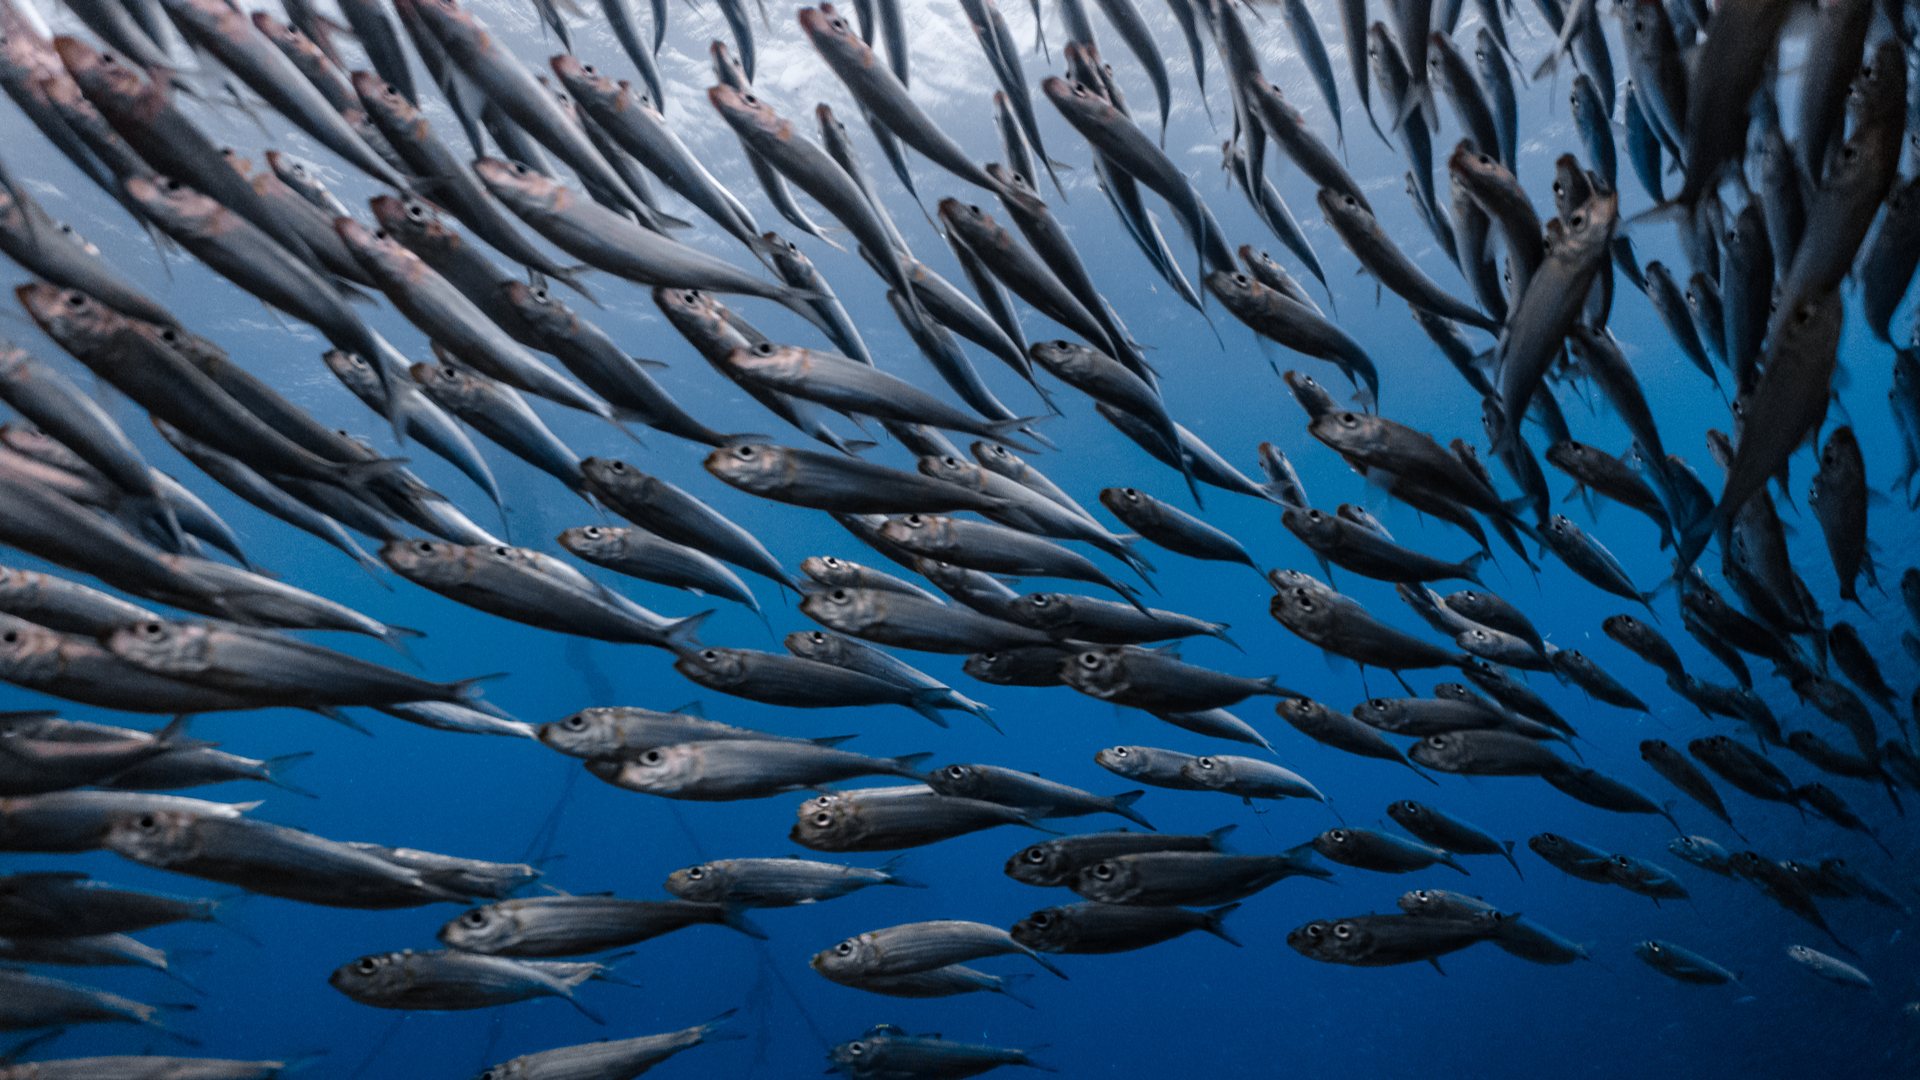 Sustainability is crucial if we want to still see fish in the sea in a few decades. 